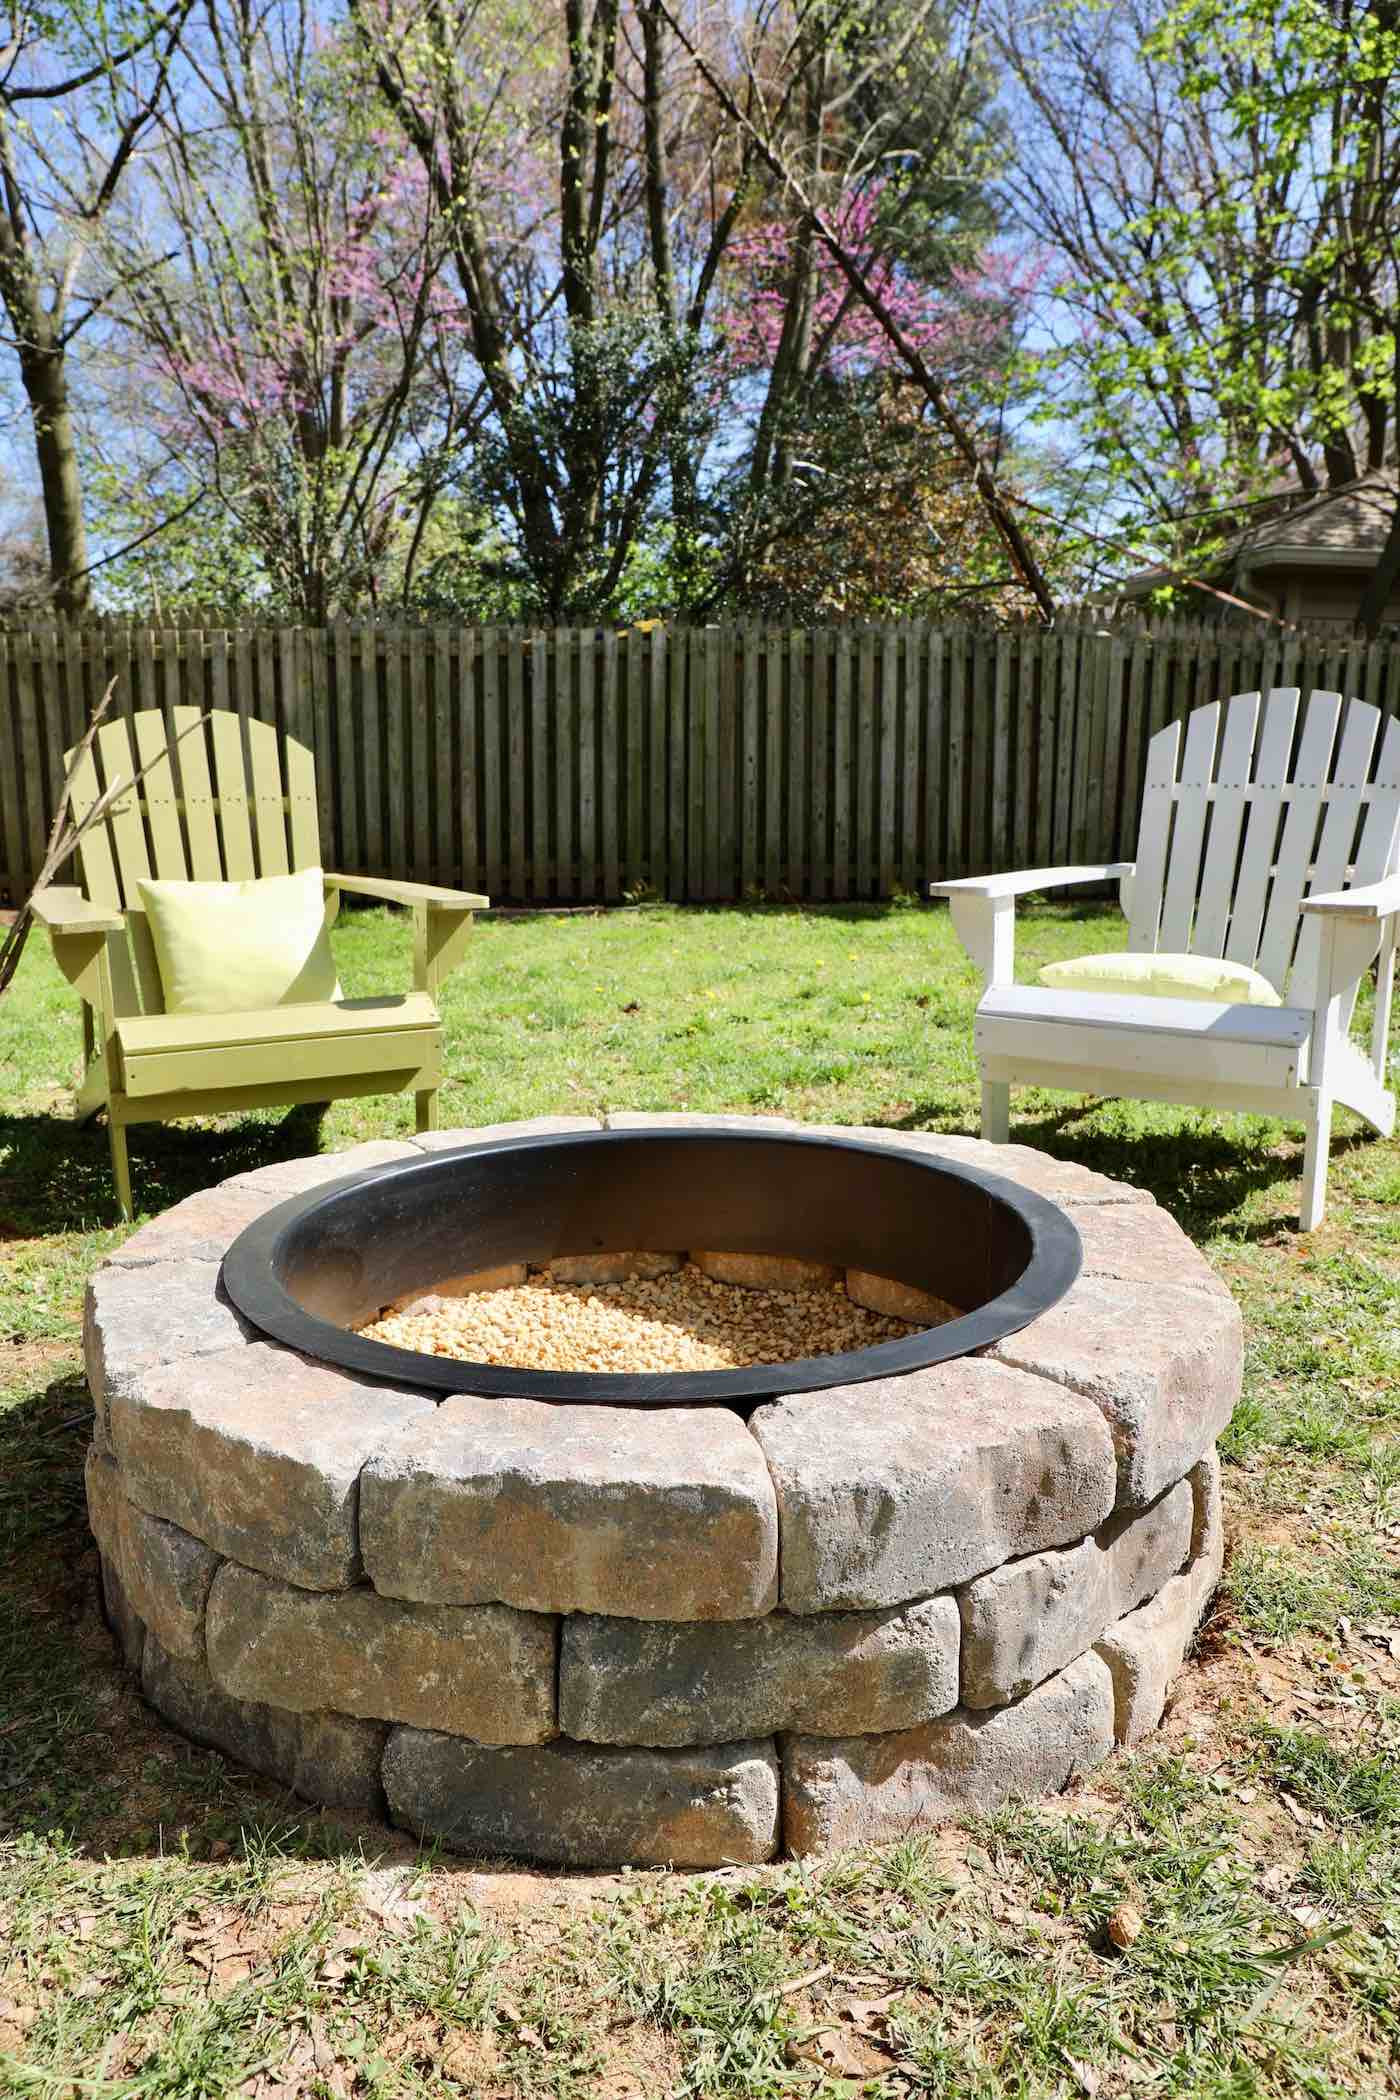 Firepit In Backyard
 How to Build a Fire Pit in Your Backyard I Used a Fire